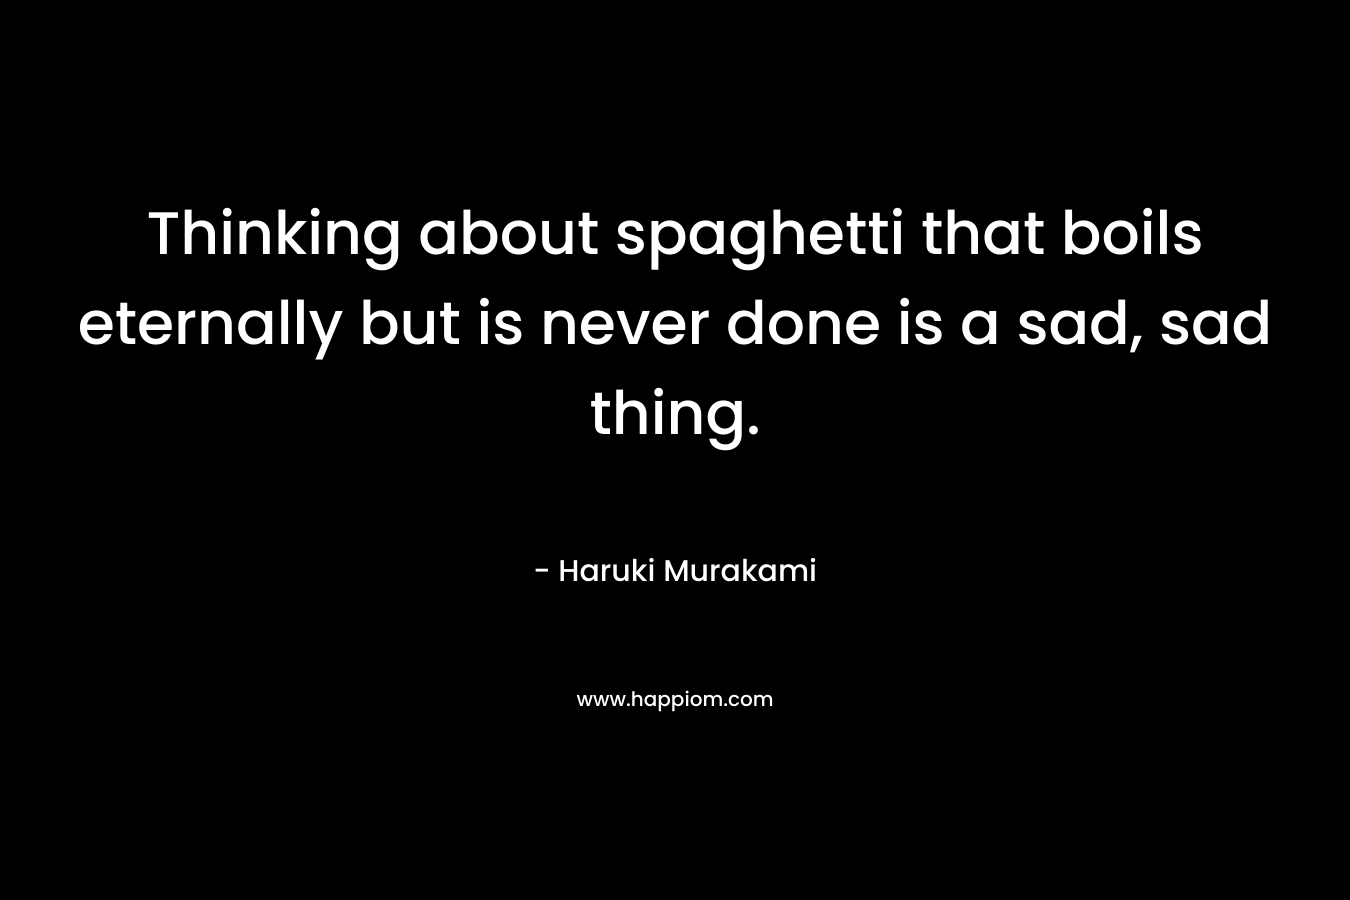 Thinking about spaghetti that boils eternally but is never done is a sad, sad thing. – Haruki Murakami